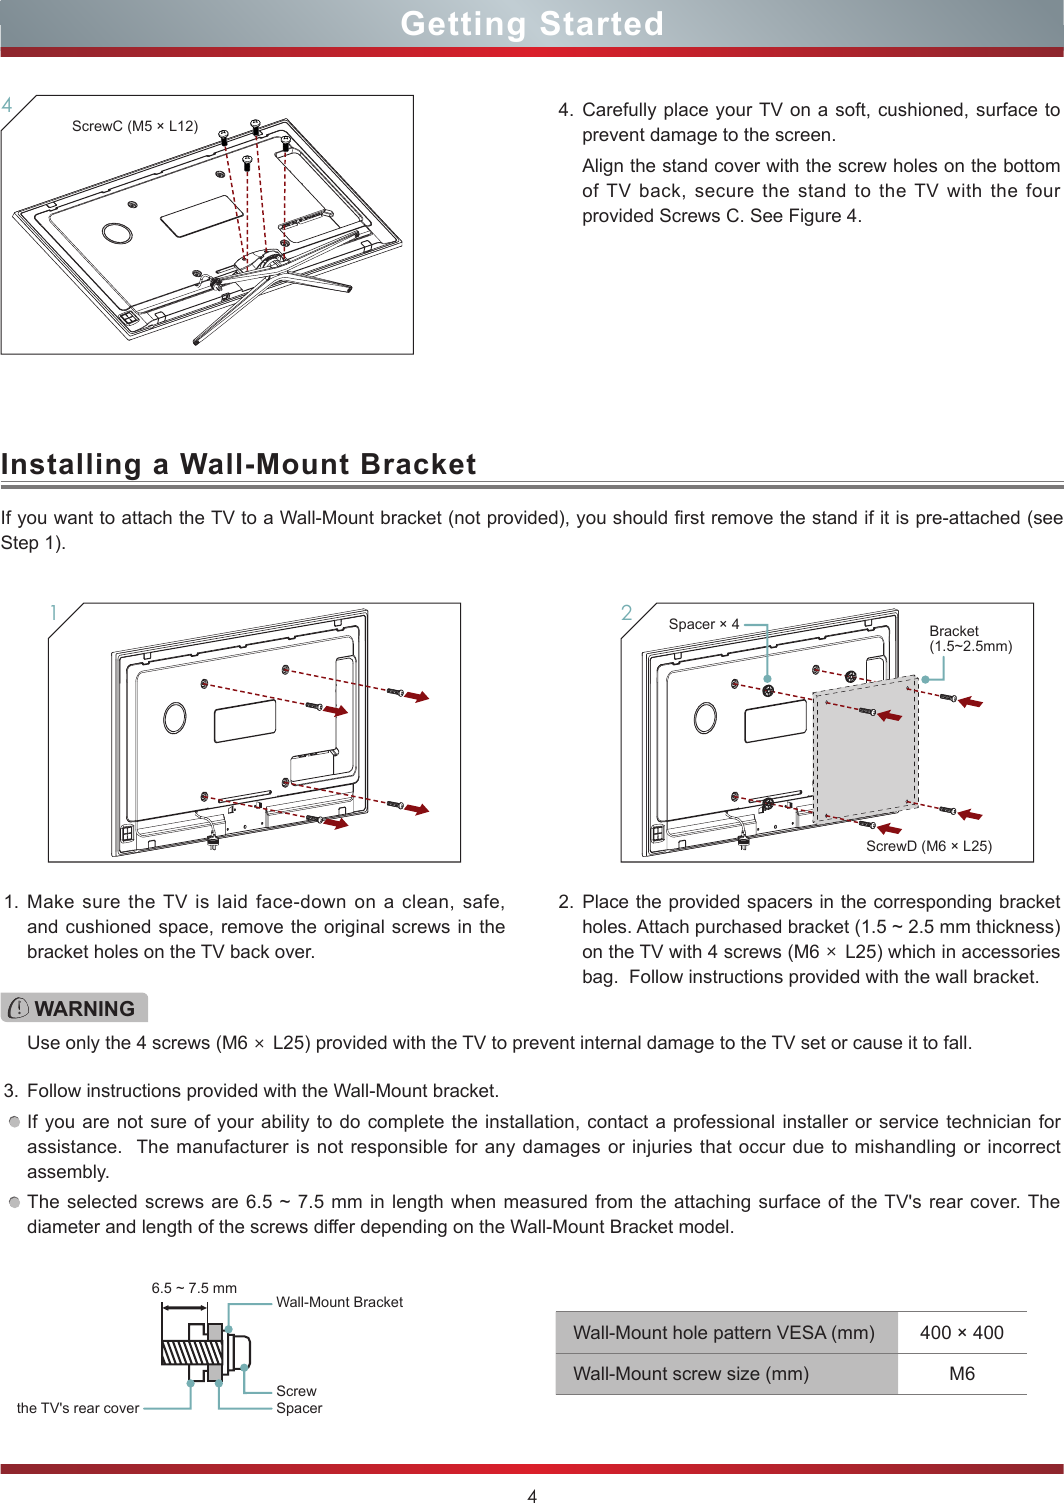 4Getting Started4ScrewC (M5 × L12)4. Carefully place your TV on a soft, cushioned, surface to prevent damage to the screen.Align the stand cover with the screw holes on the bottom of TV back, secure the stand to the TV with the four provided Screws C. See Figure 4.Installing a Wall-Mount BracketIf you want to attach the TV to a Wall-Mount bracket (not provided), you should first remove the stand if it is pre-attached (see Step 1).1. Make sure the TV is laid face-down on a clean, safe, and cushioned space, remove the original screws in the bracket holes on the TV back over.3. Follow instructions provided with the Wall-Mount bracket.If you are not sure of your ability to do complete the installation, contact a professional installer or service technician for assistance.  The manufacturer is not responsible for any damages or injuries that occur due to mishandling or incorrect assembly.The selected screws are 6.5 ~ 7.5 mm in length when measured from the attaching surface of the TV&apos;s rear cover. The diameter and length of the screws differ depending on the Wall-Mount Bracket model.2. Place the provided spacers in the corresponding bracket  holes. Attach purchased bracket (1.5 ~ 2.5 mm thickness) on the TV with 4 screws (M6 × L25) which in accessories bag.  Follow instructions provided with the wall bracket.1WARNINGUse only the 4 screws (M6 × L25) provided with the TV to prevent internal damage to the TV set or cause it to fall.Wall-Mount Bracket6.5 ~ 7.5 mmScrewSpacerthe TV&apos;s rear coverWall-Mount hole pattern VESA (mm) 400 × 400Wall-Mount screw size (mm) M6ScrewD (M6 × L25)2Spacer × 4 Bracket  (1.5~2.5mm)